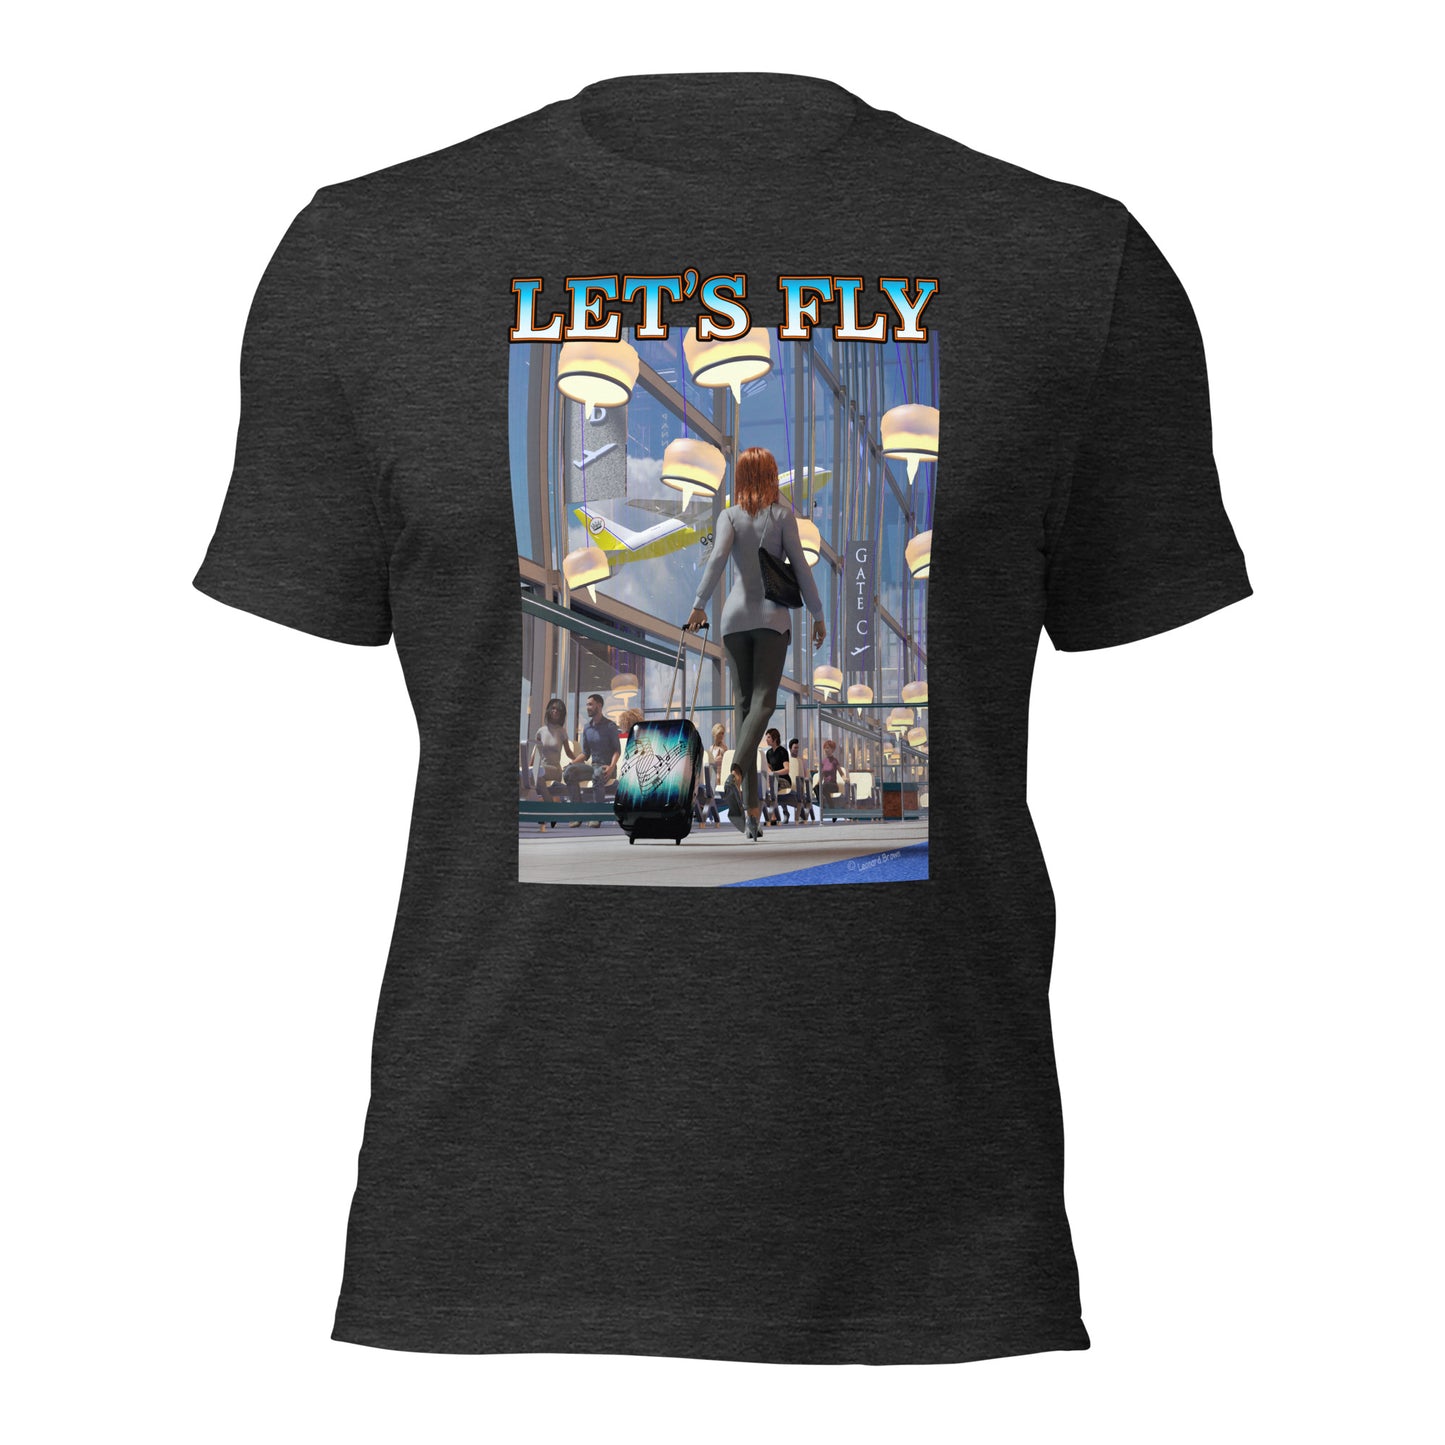 Let’s Fly Yellow Plane t-shirt